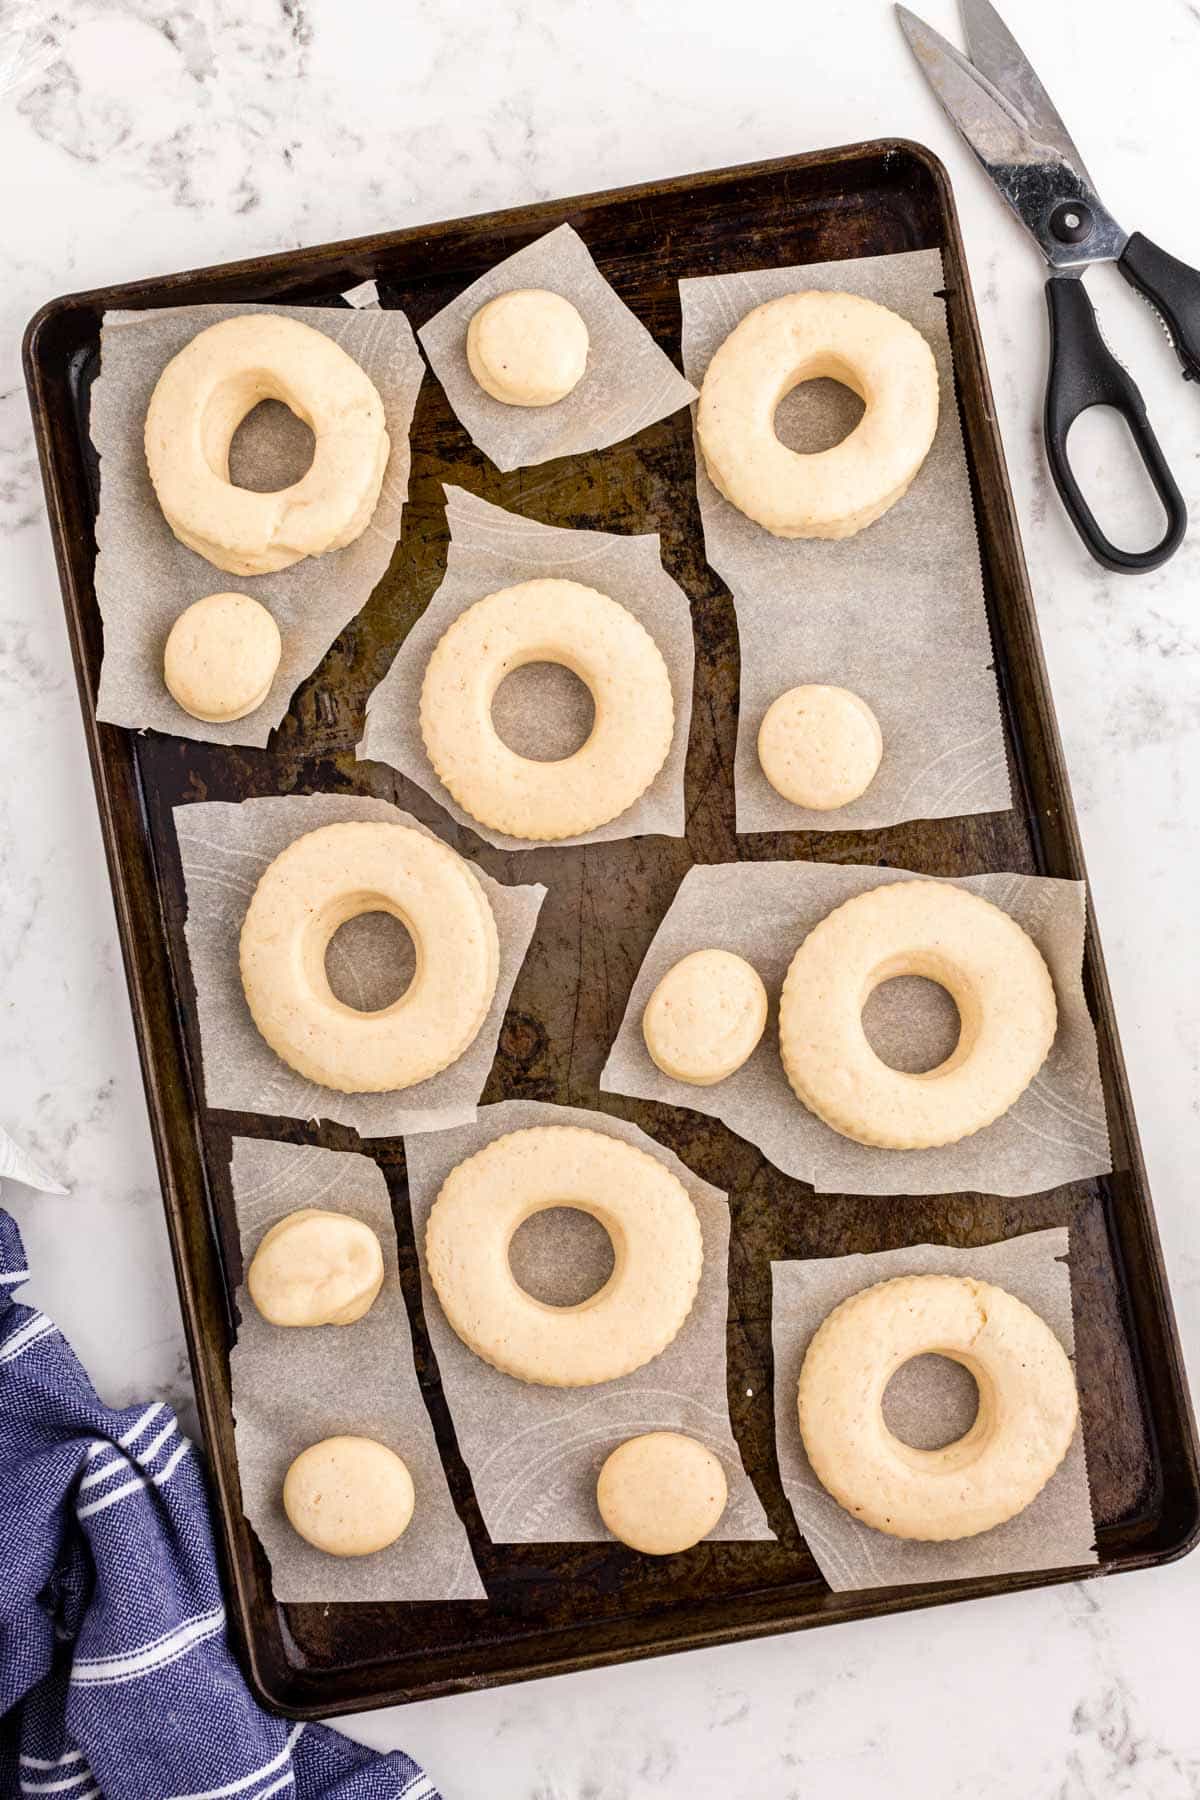 Donuts ready to be fried, resting on a baking sheet.